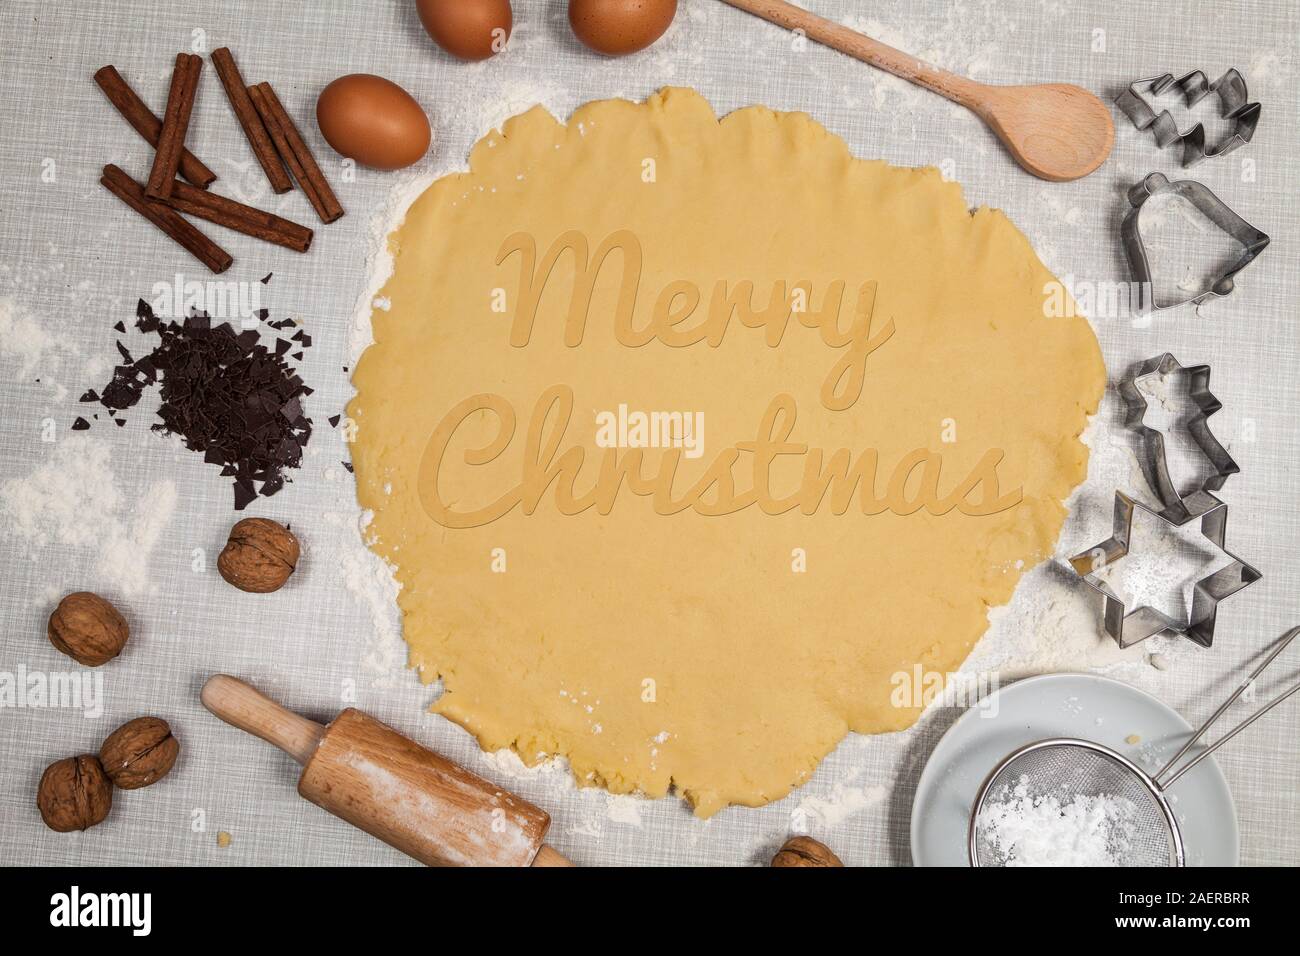 Merry Christmas written on a cookie dough Stock Photo